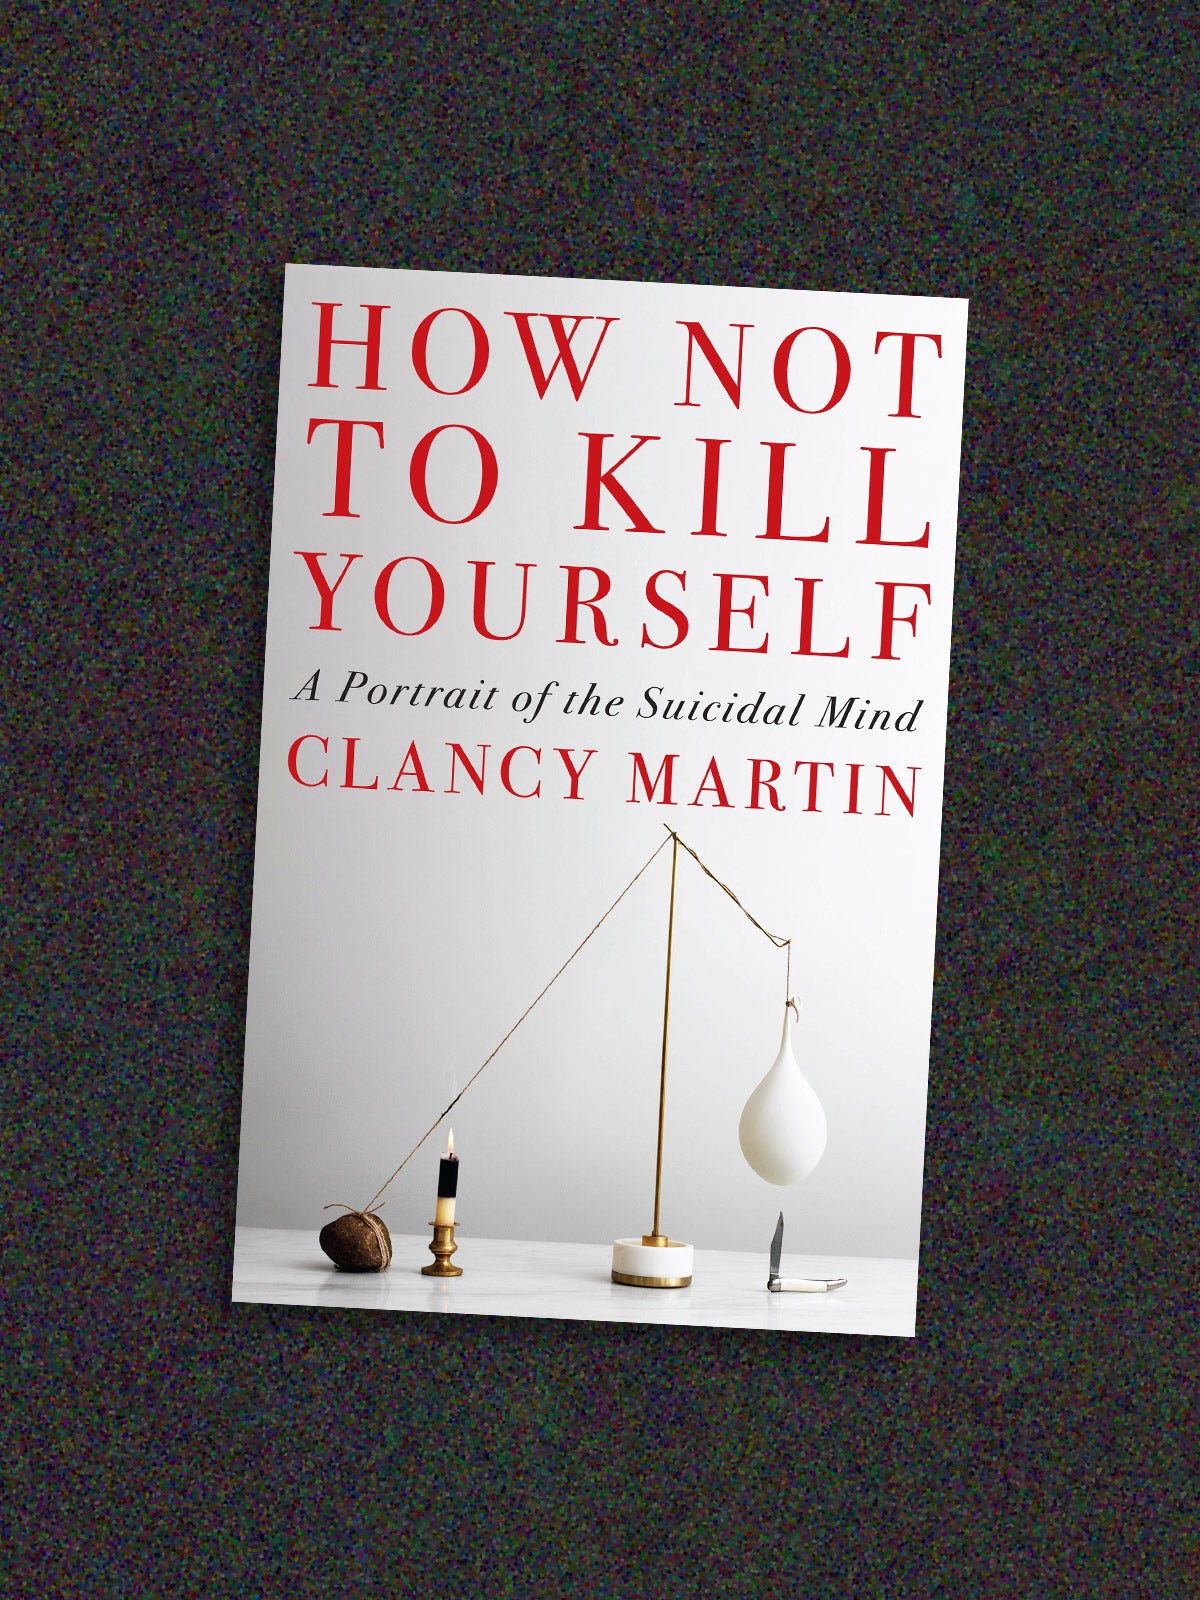 Image of the book cover “ ‘How not to kill yourself’ by Clancy Martin” on a grey-speckled background.